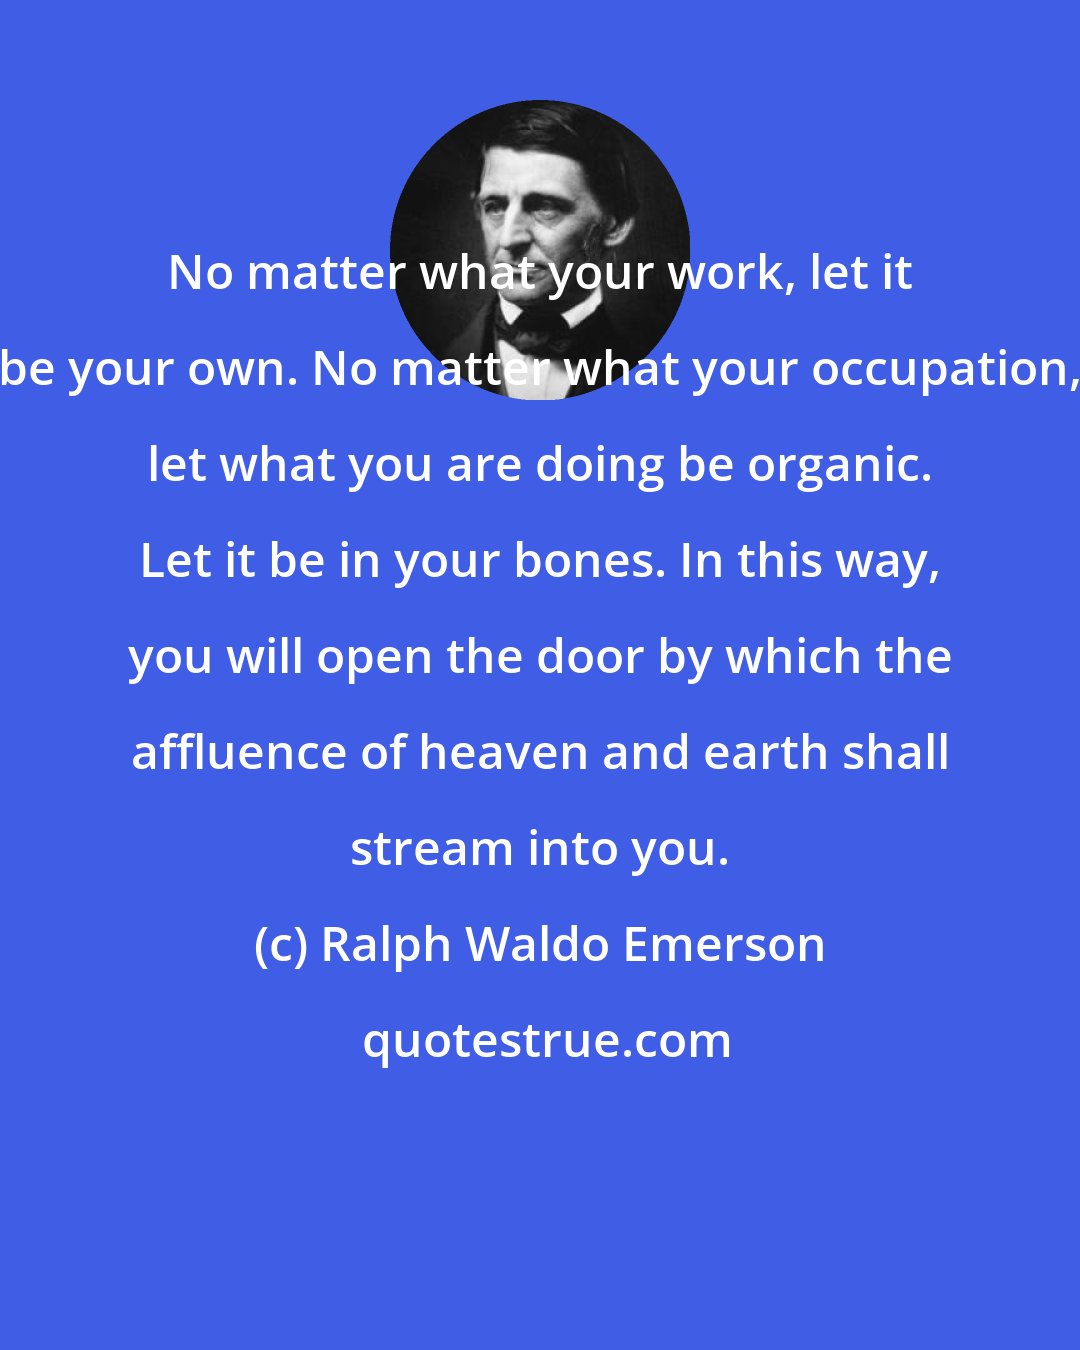 Ralph Waldo Emerson: No matter what your work, let it be your own. No matter what your occupation, let what you are doing be organic. Let it be in your bones. In this way, you will open the door by which the affluence of heaven and earth shall stream into you.